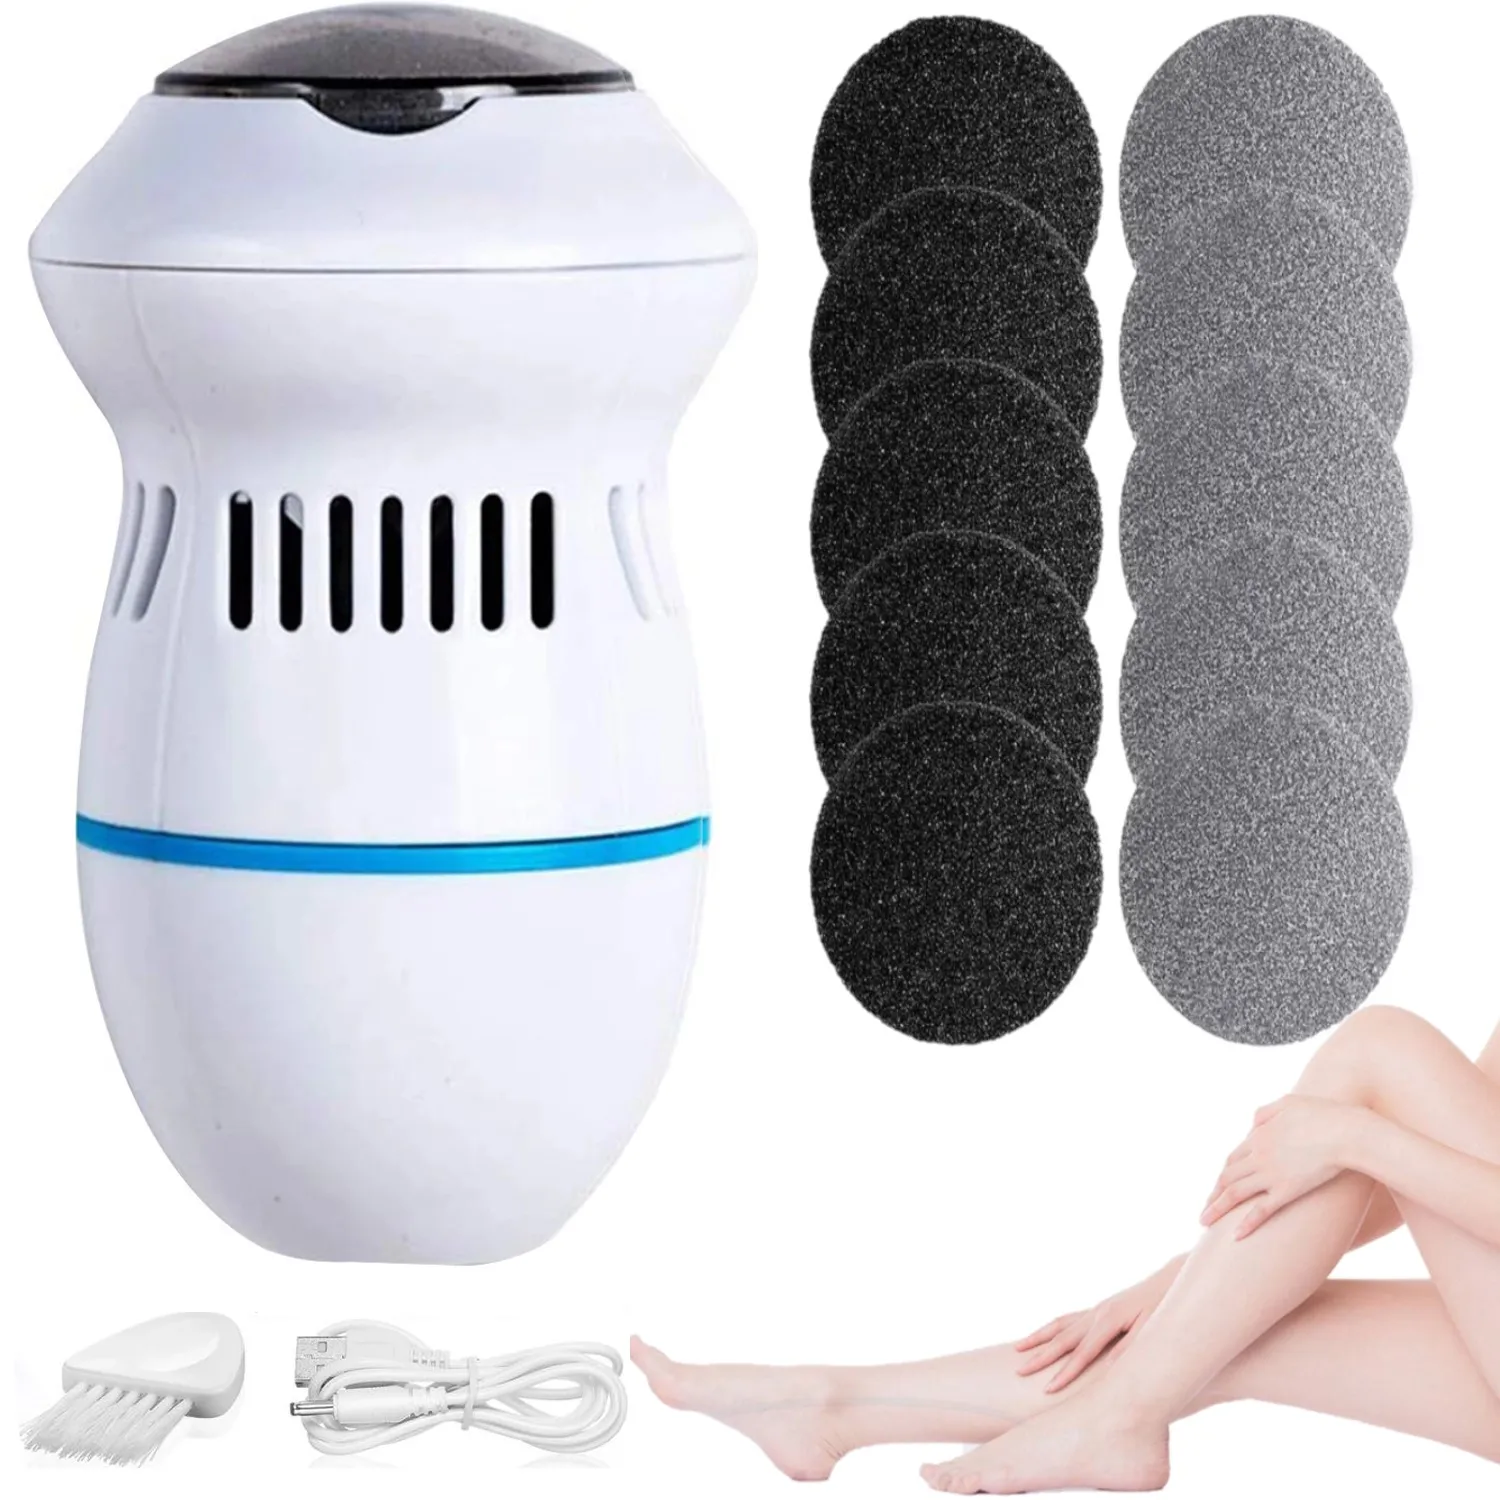 https://ae01.alicdn.com/kf/S2c48e8f98eb740fca851393a269f2bb8B/USB-Multifunctional-Electric-Foot-Grinder-Machine-Exfoliating-Dead-Skin-Callus-Remover-Foot-Care-Pedicure-Device-Dropshipping.jpg